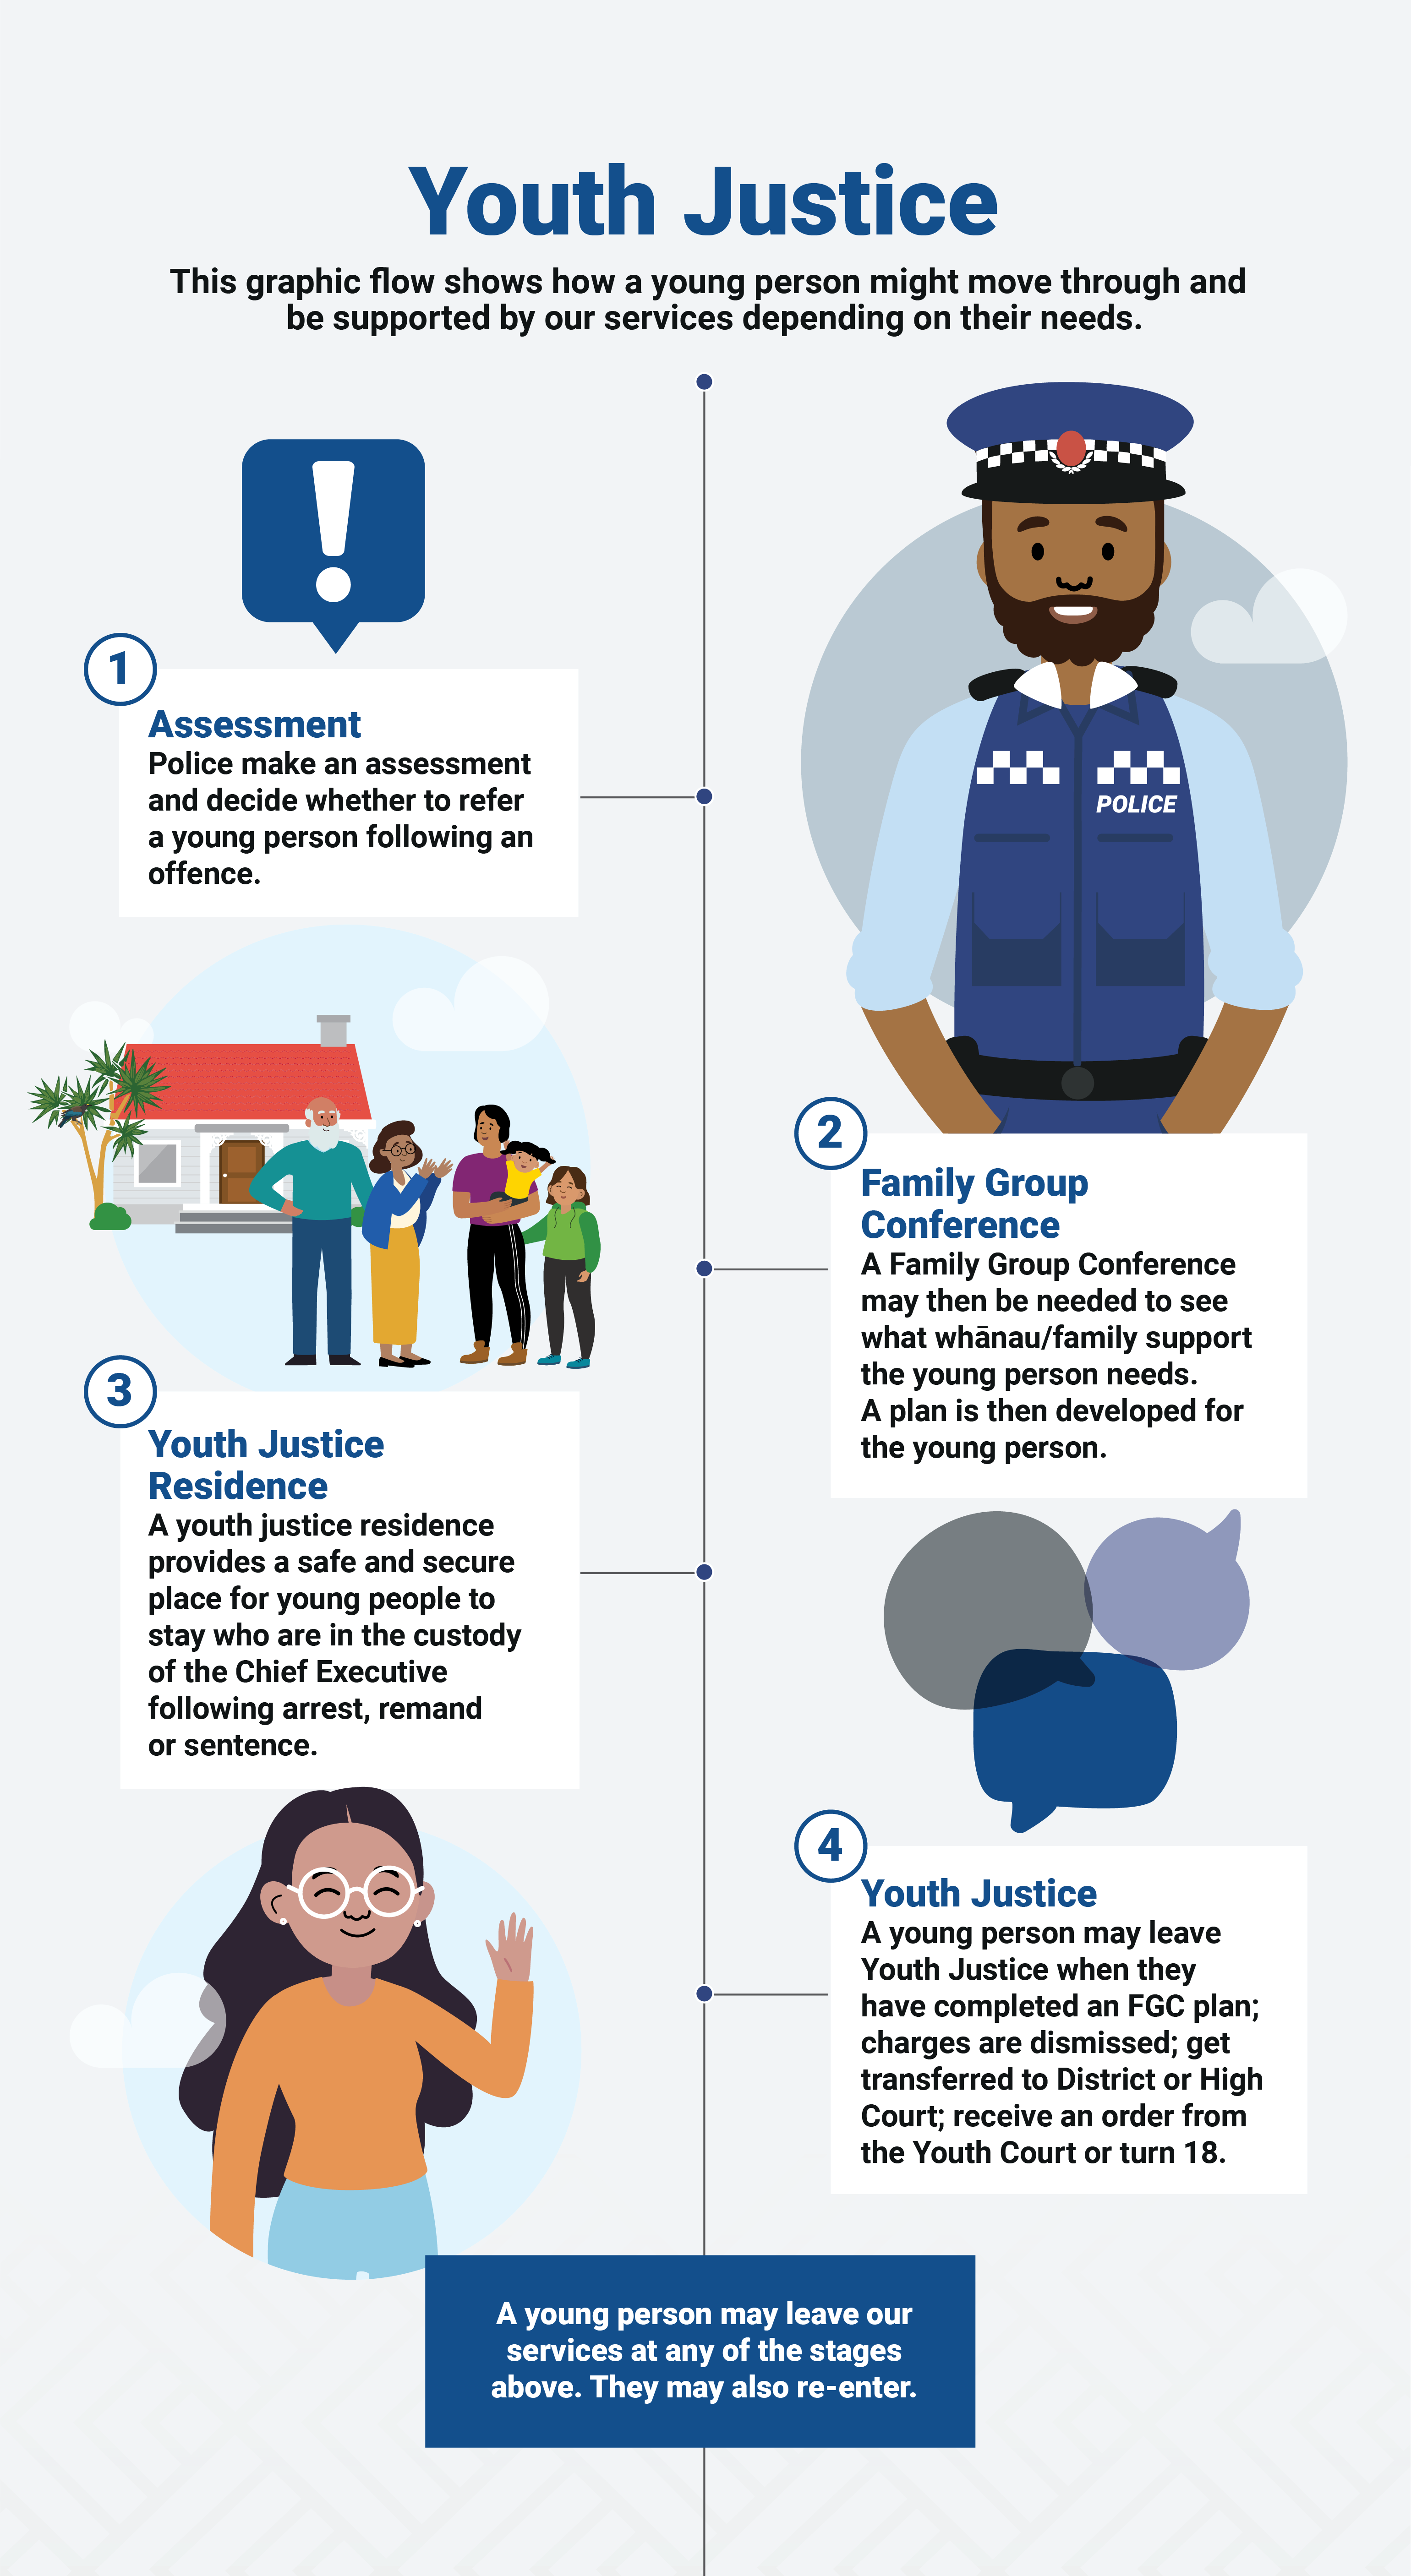 Youth Justice overview